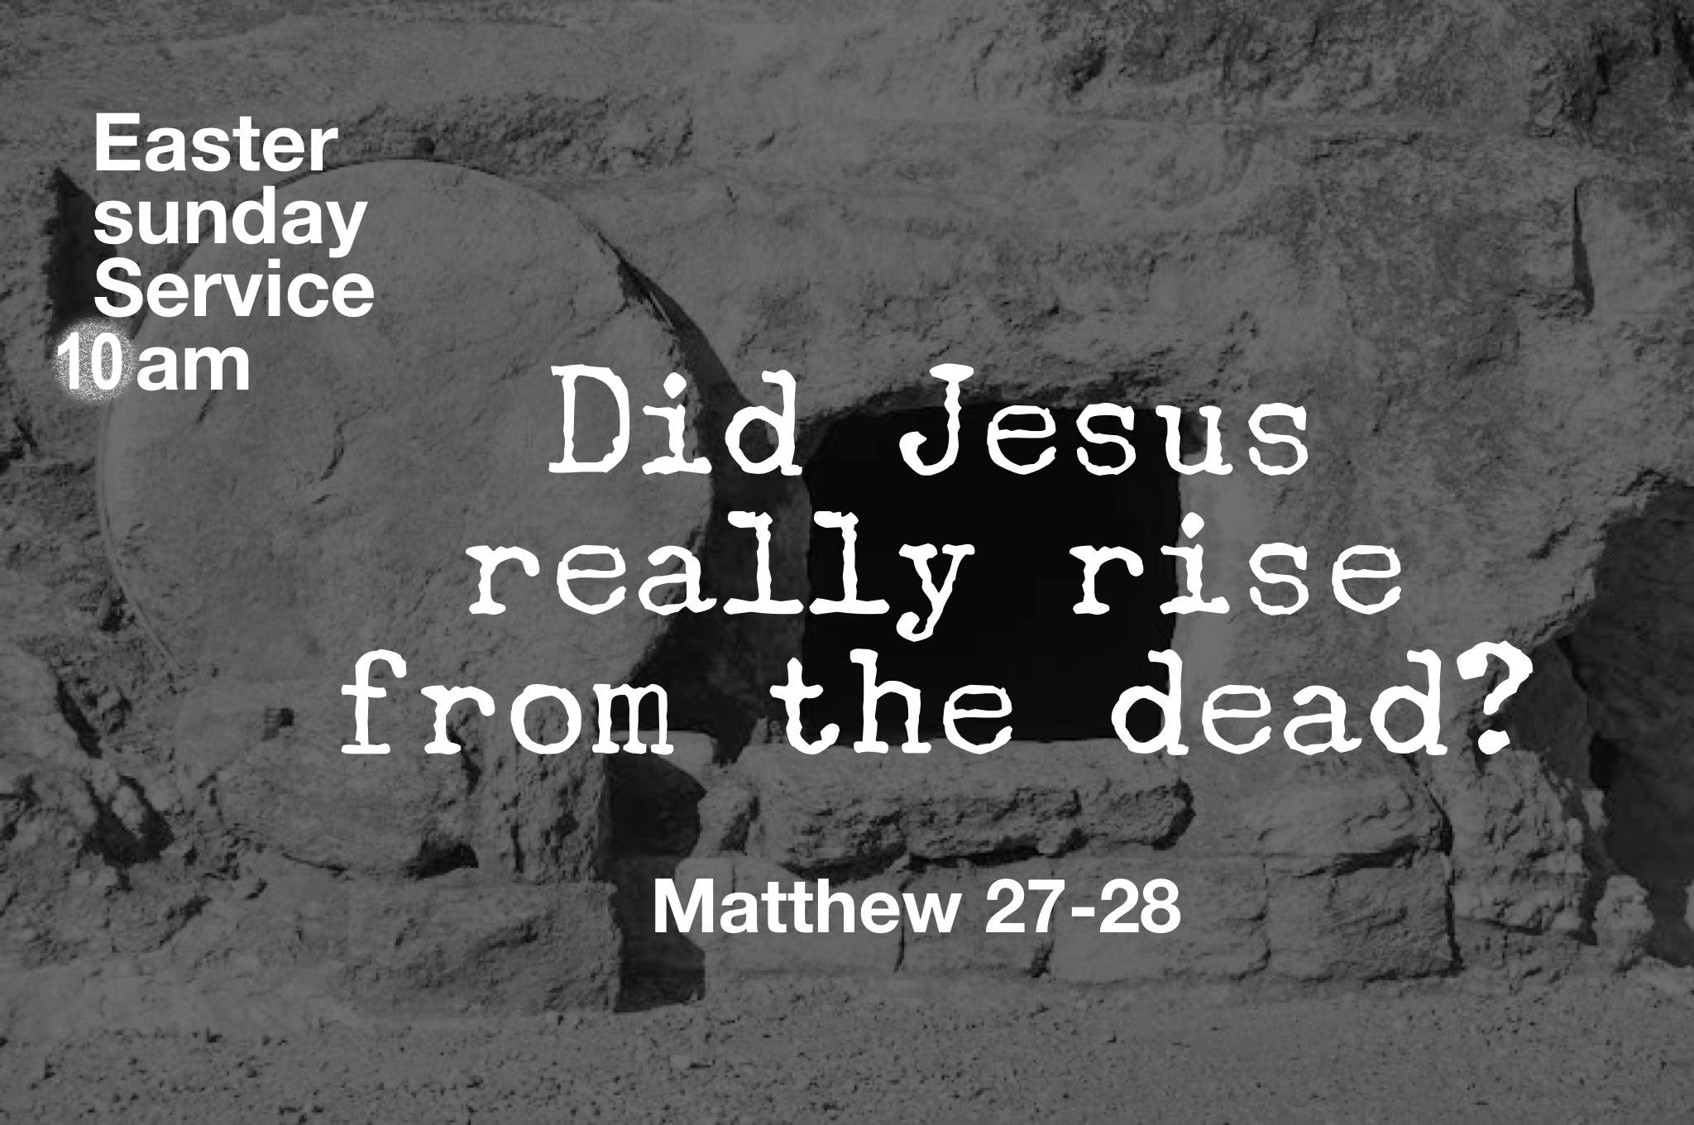 Did Jesus really rise from the dead?